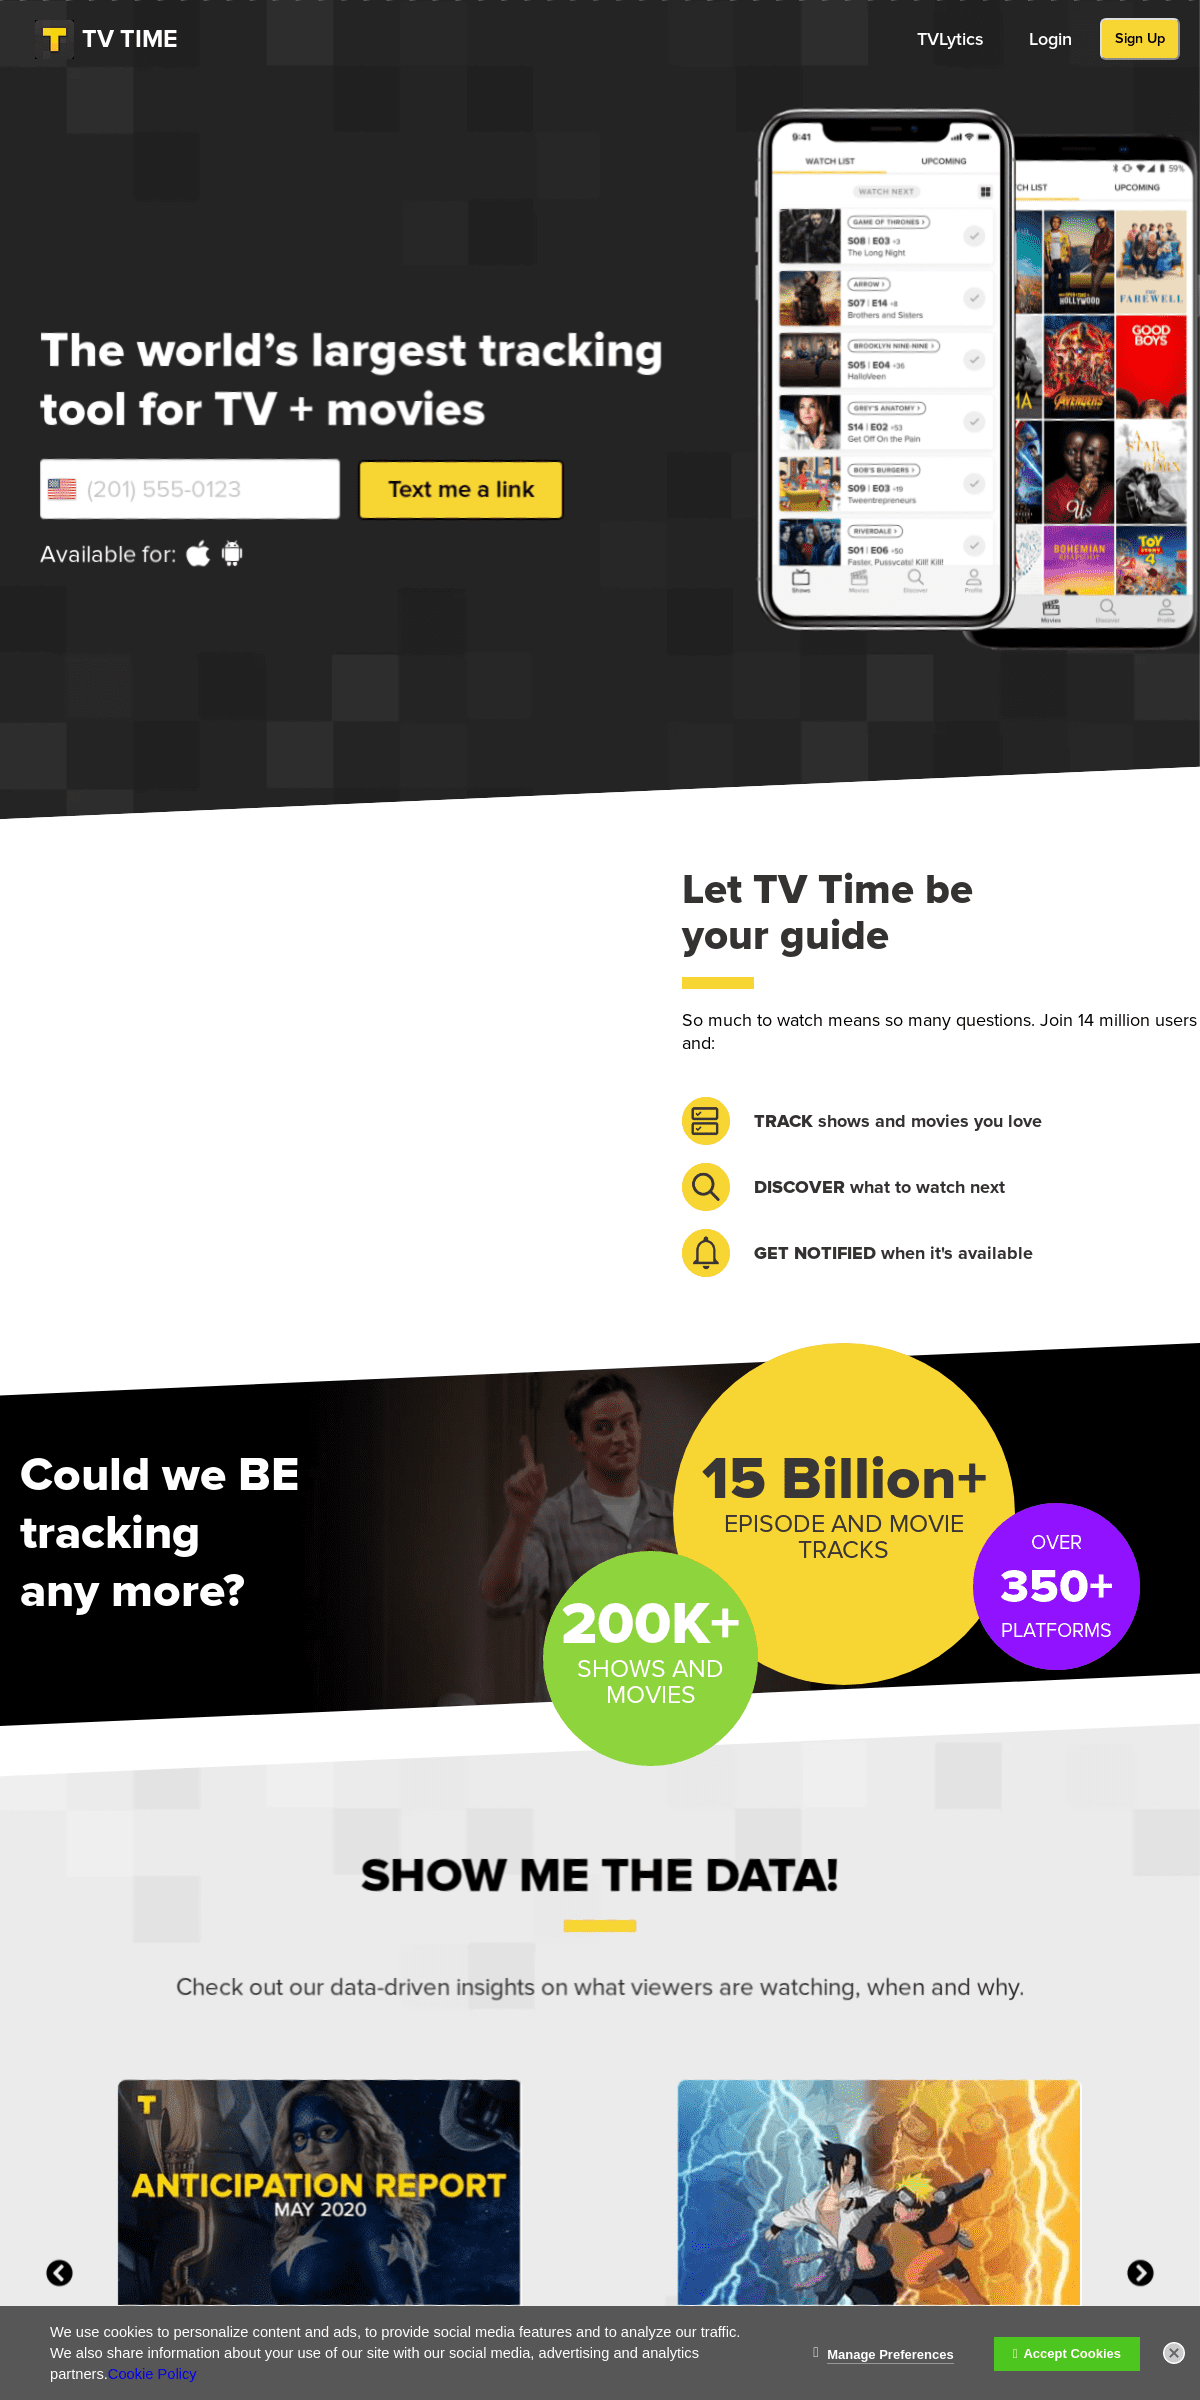 A complete backup of tvshowtime.com